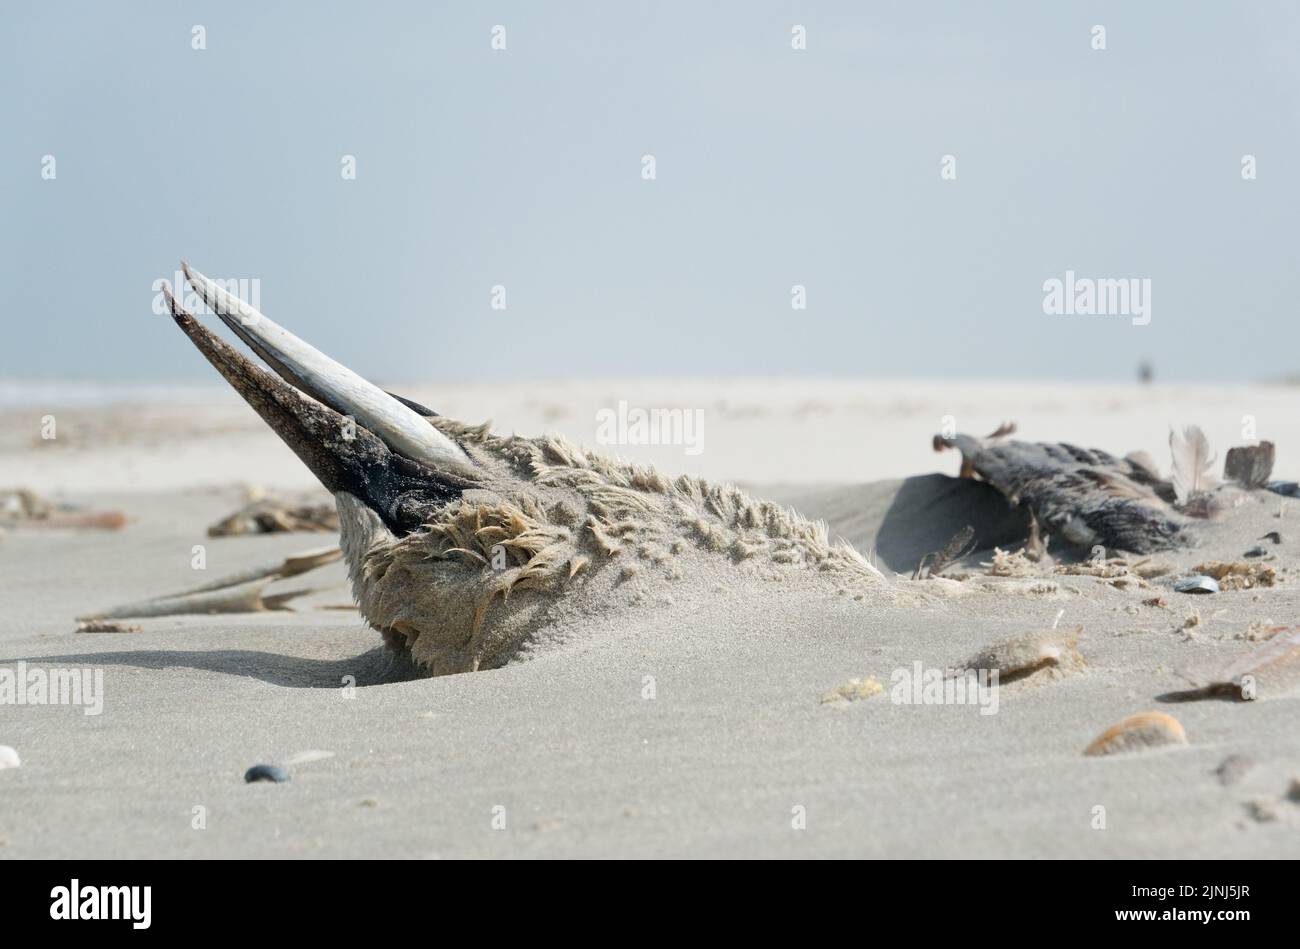 Dead Northern gannet, probably victim of avian influenza, washed up on the beach and partially buried under the sand Stock Photo